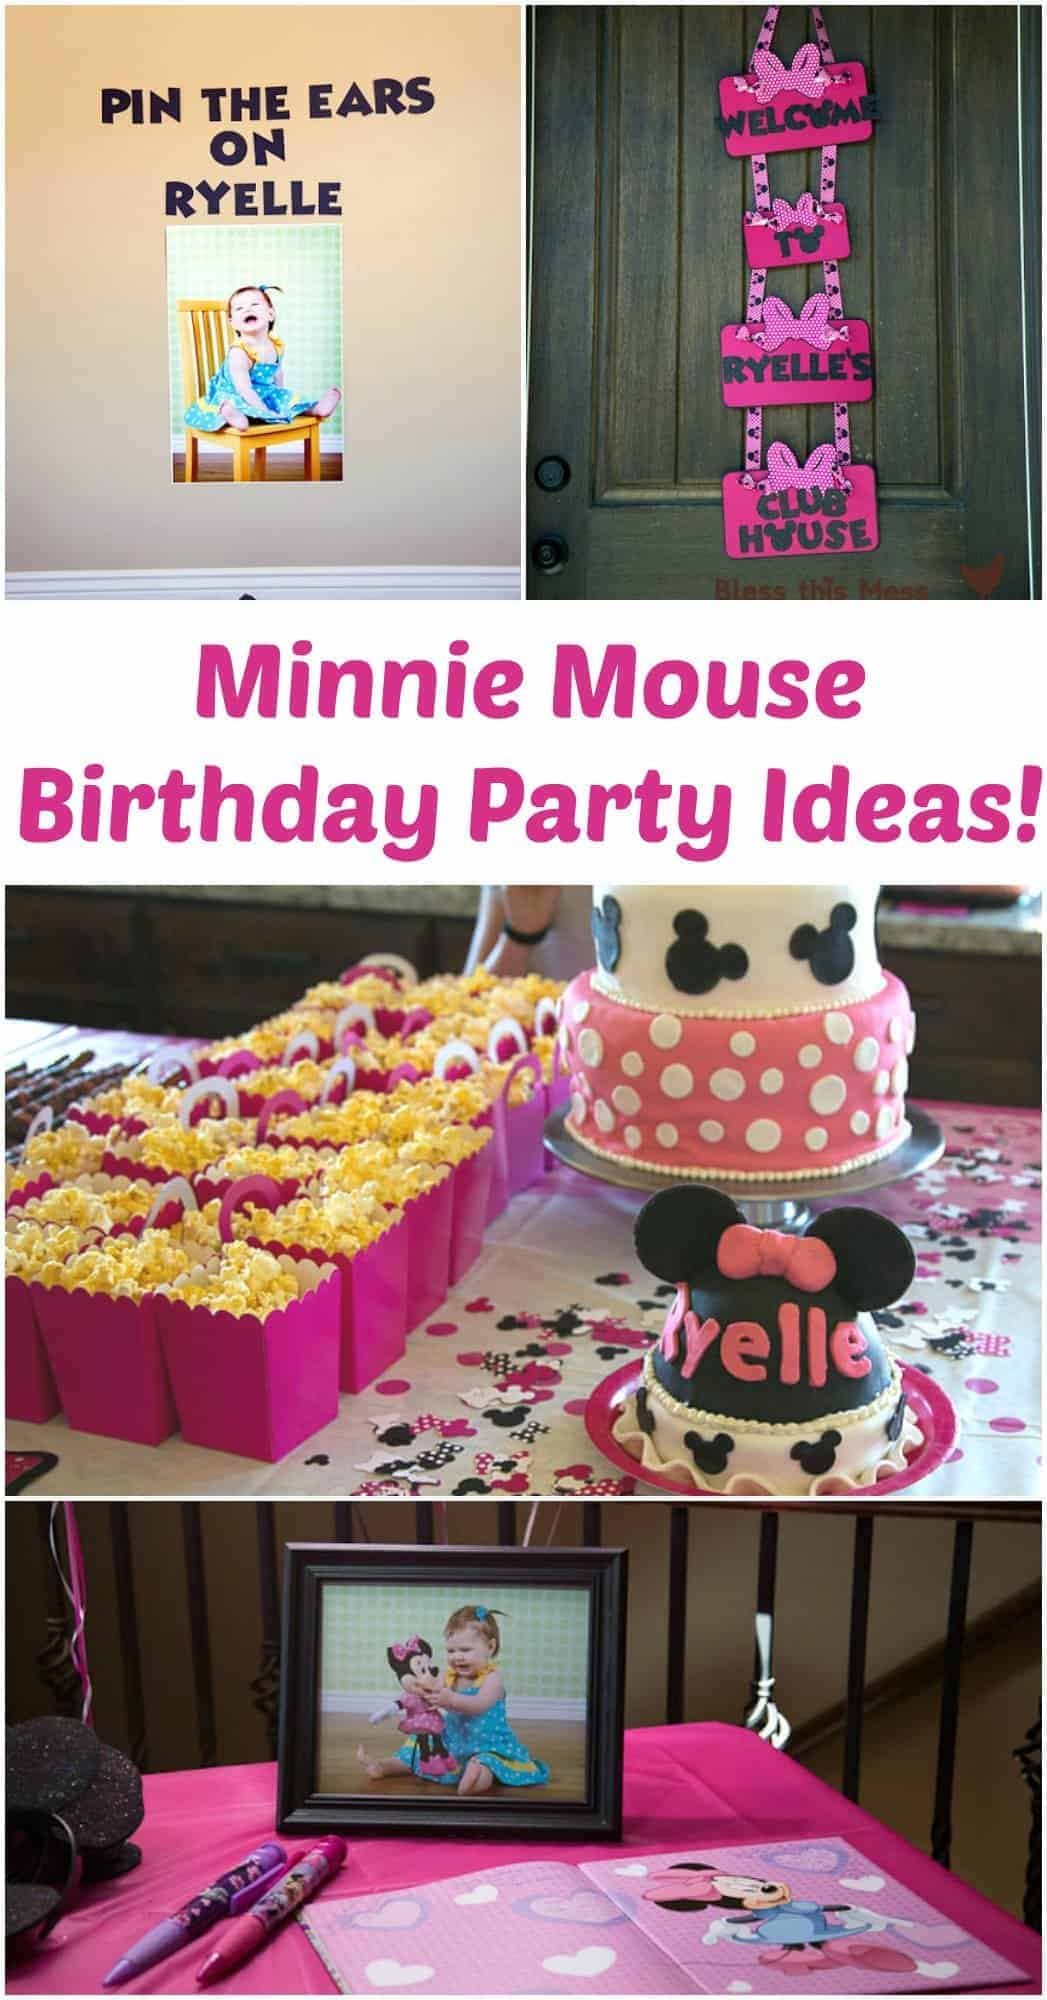 Ideas For A Minnie Mouse Birthday Party
 Minnie Mouse Birthday Party